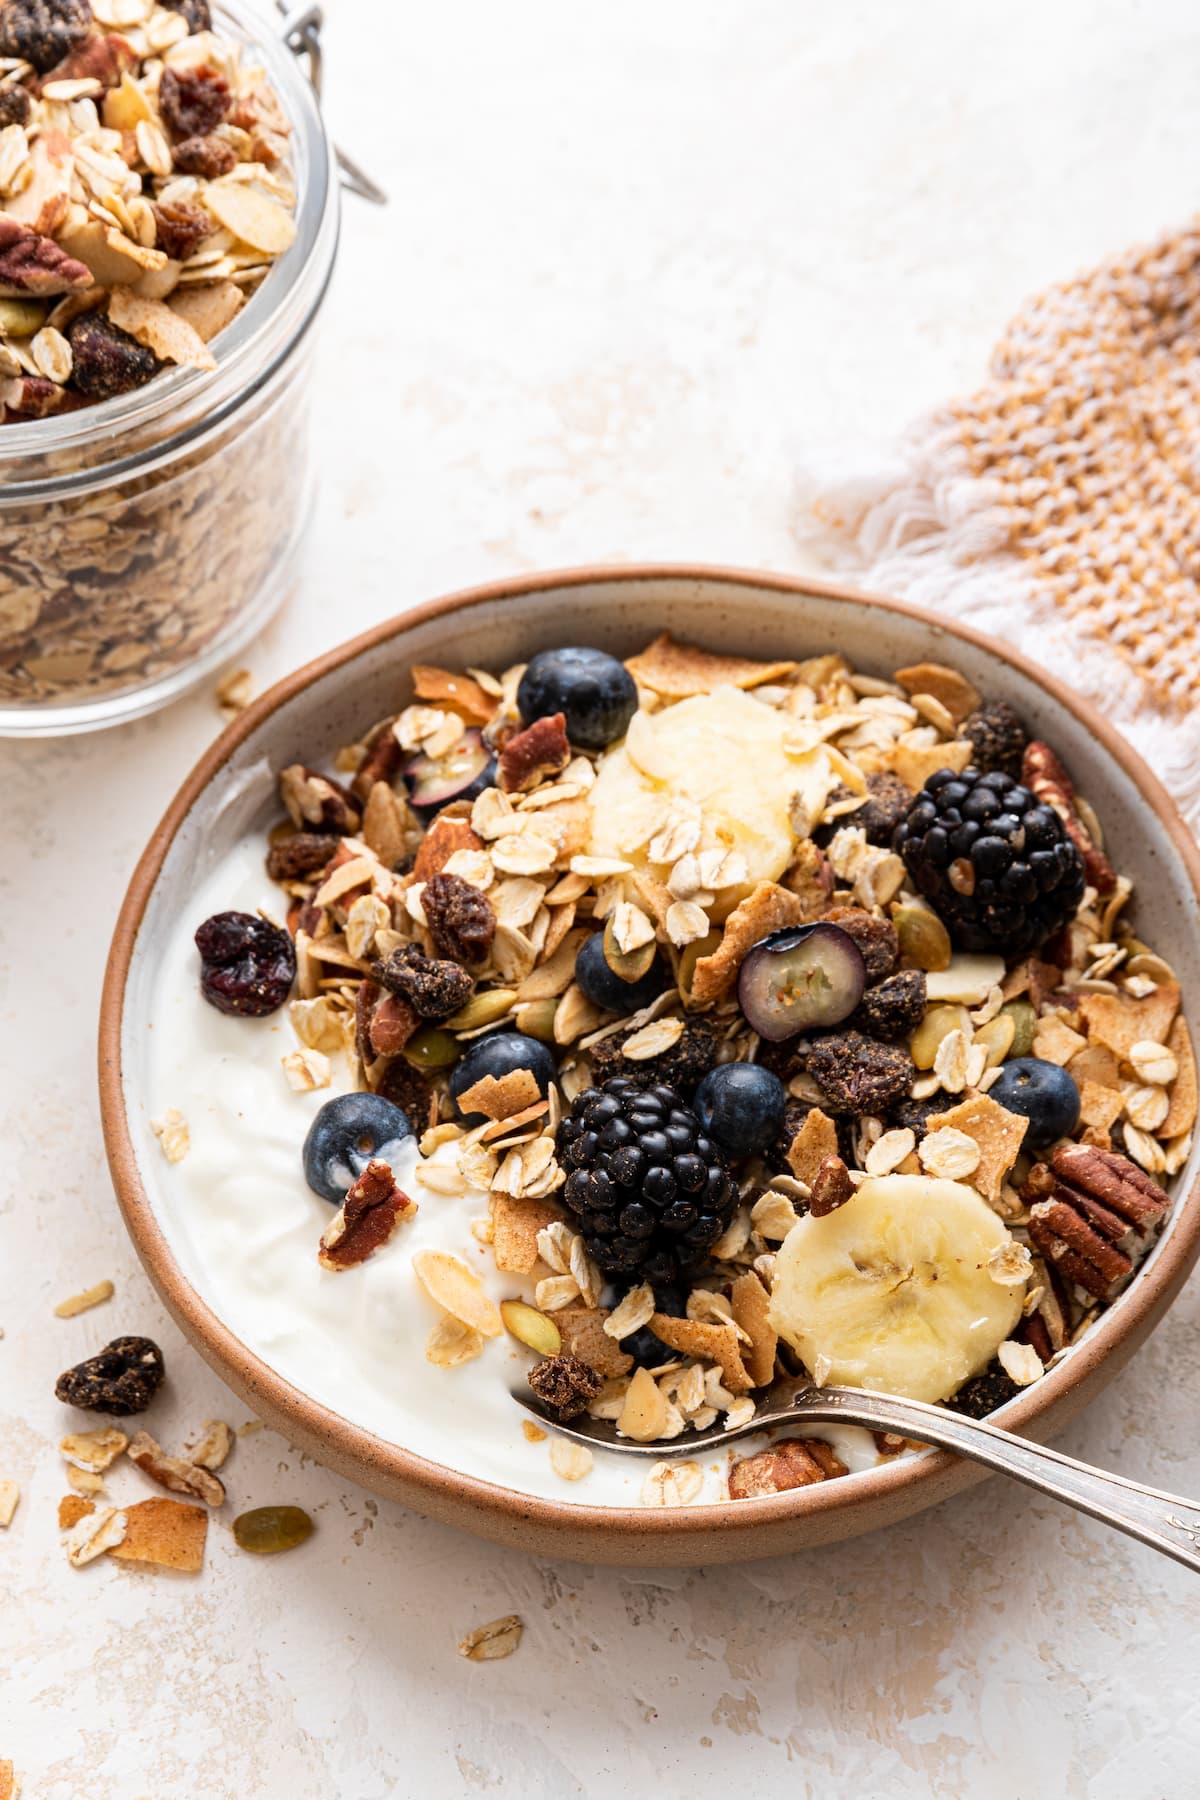 A bowl of yogurt topped with fresh berries, banana slices, and muesli.